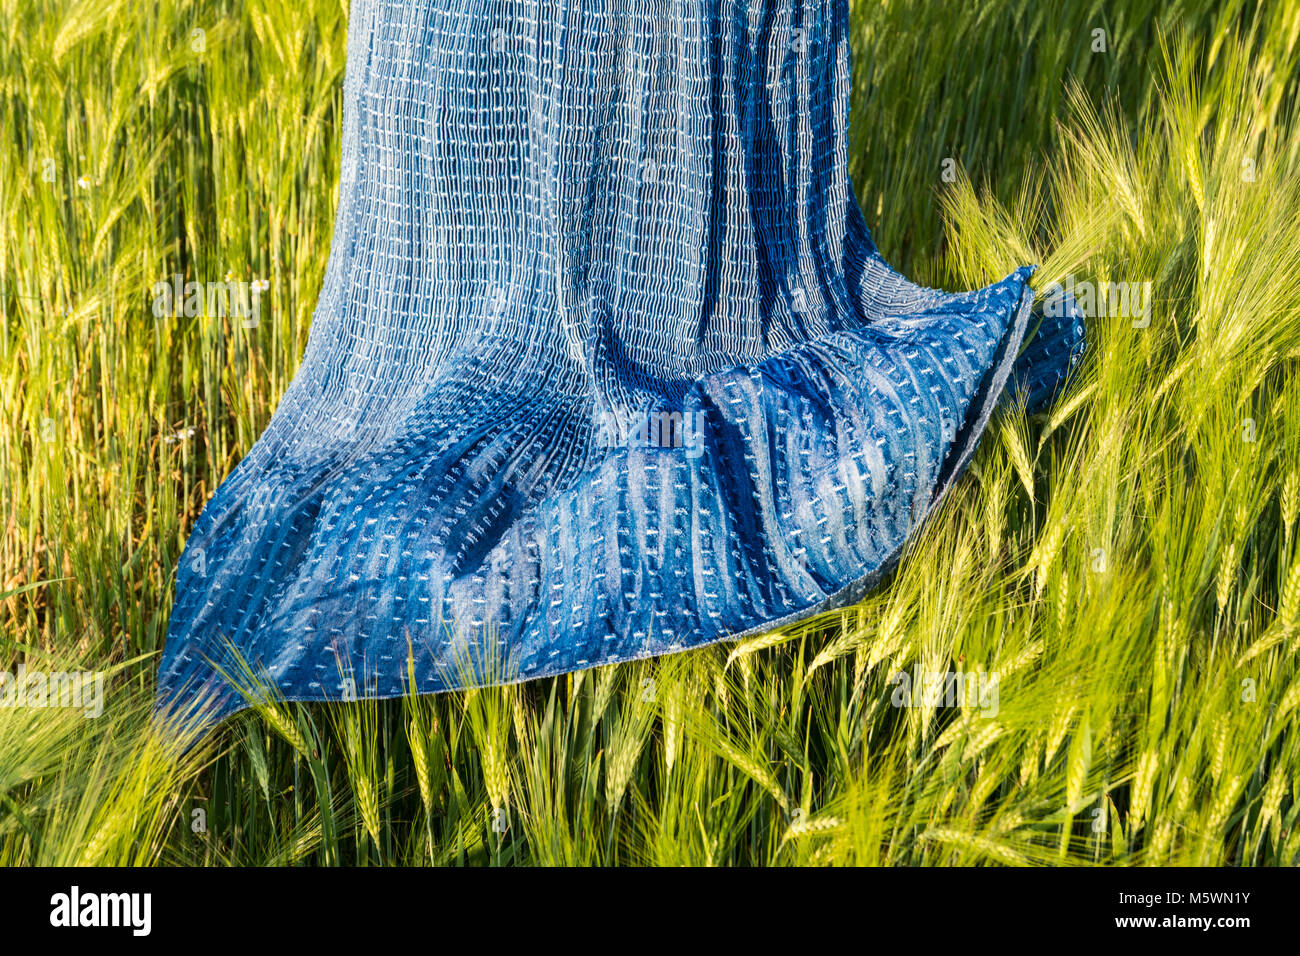 Romantic spring scene with skirt in barley field. Hordeum vulgare. Airy blue female dress in the green cornfield in beautiful sunny clear weather. Stock Photo